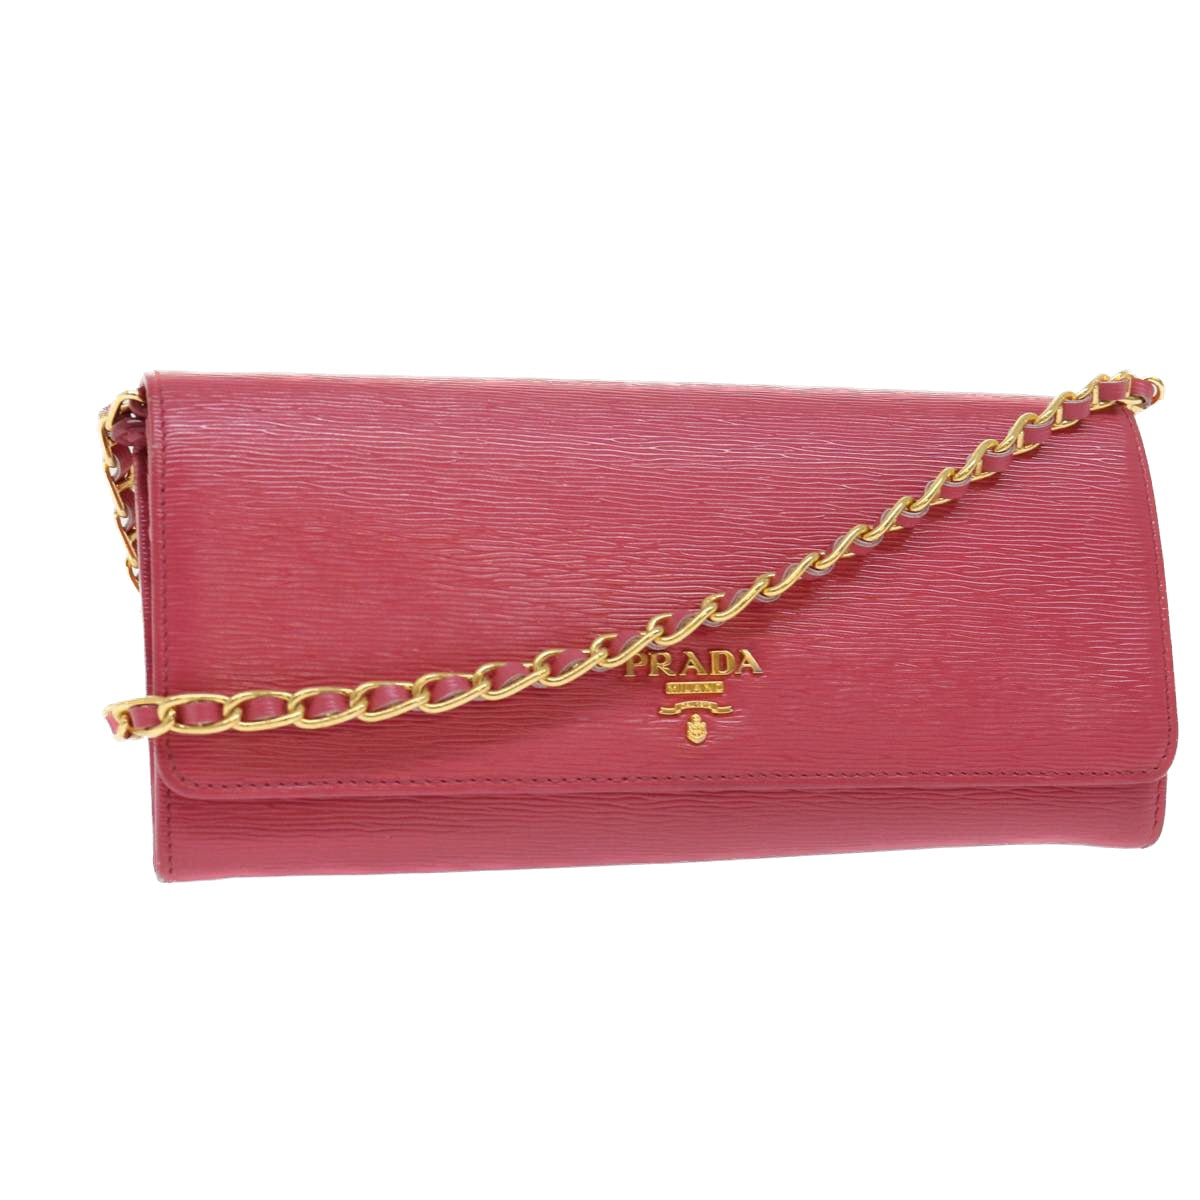 PRADA Chain Wallet Leather Pink Auth am4960